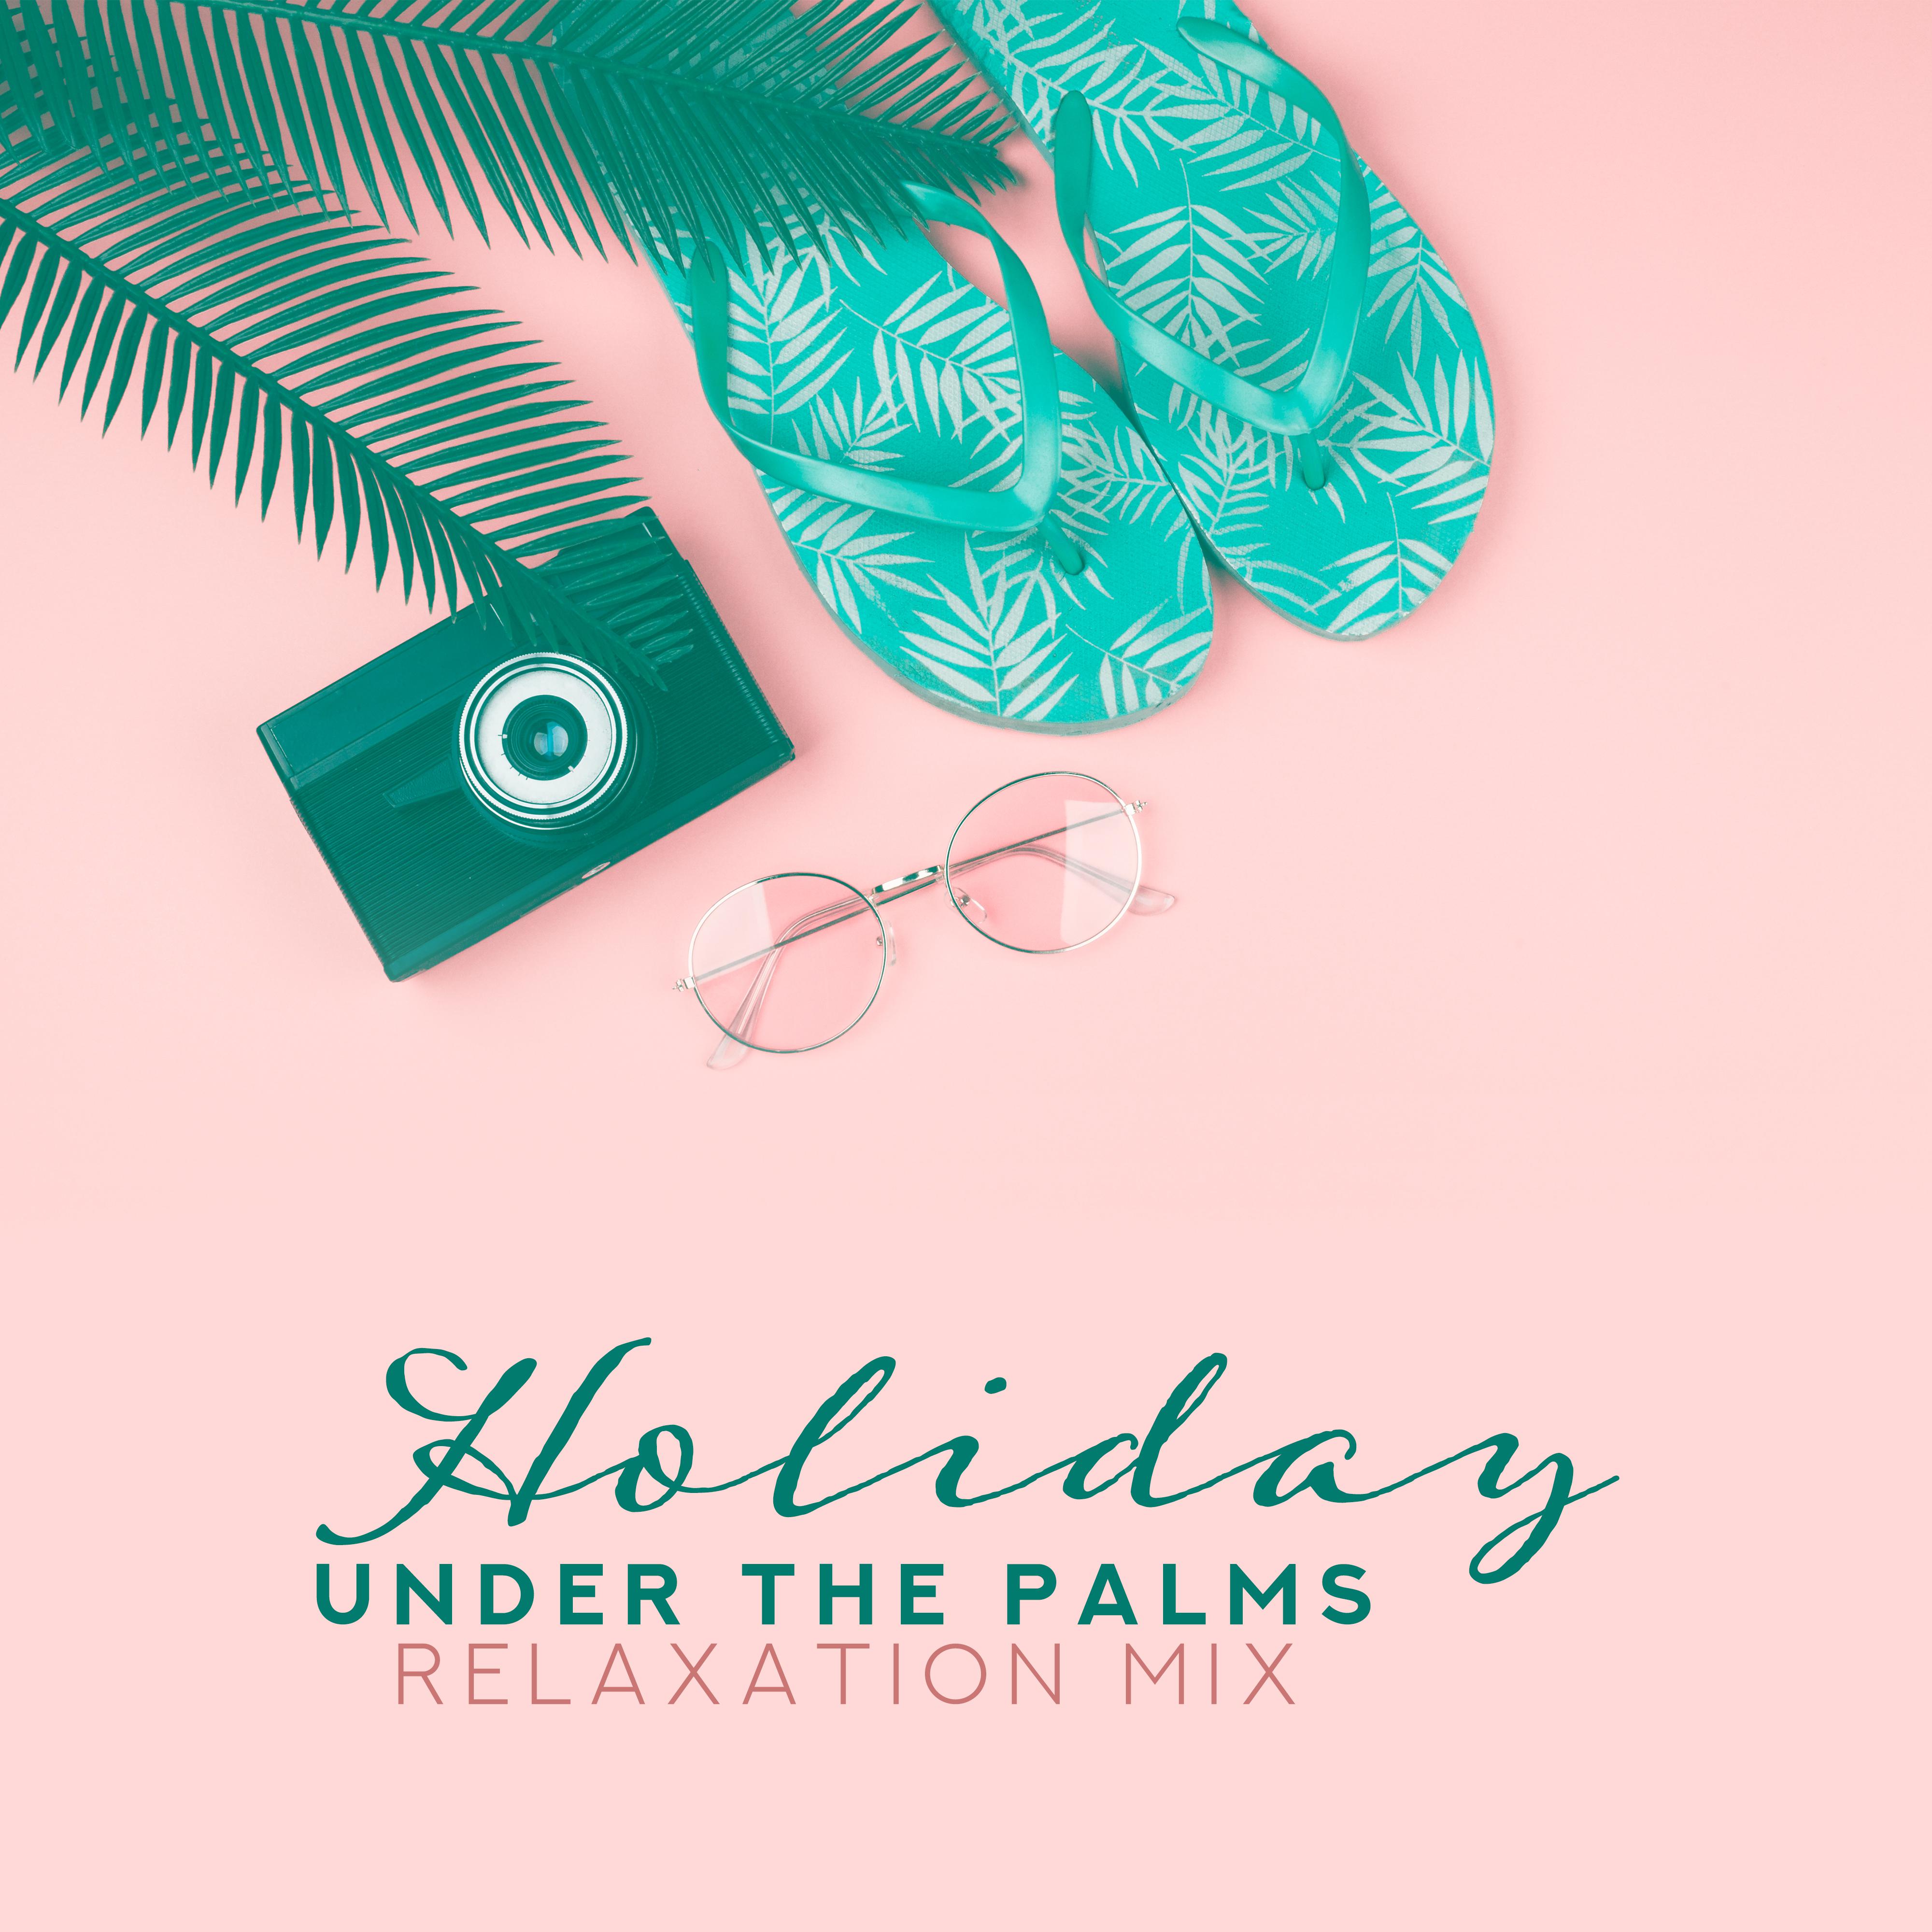 Holiday Under the Palms Relaxation Mix  Top 2019 Chillout Music for Lazy Time Spending on the Beach, Tropical Island Songs, Rest Soft Sounds, Easy Listening Vibes